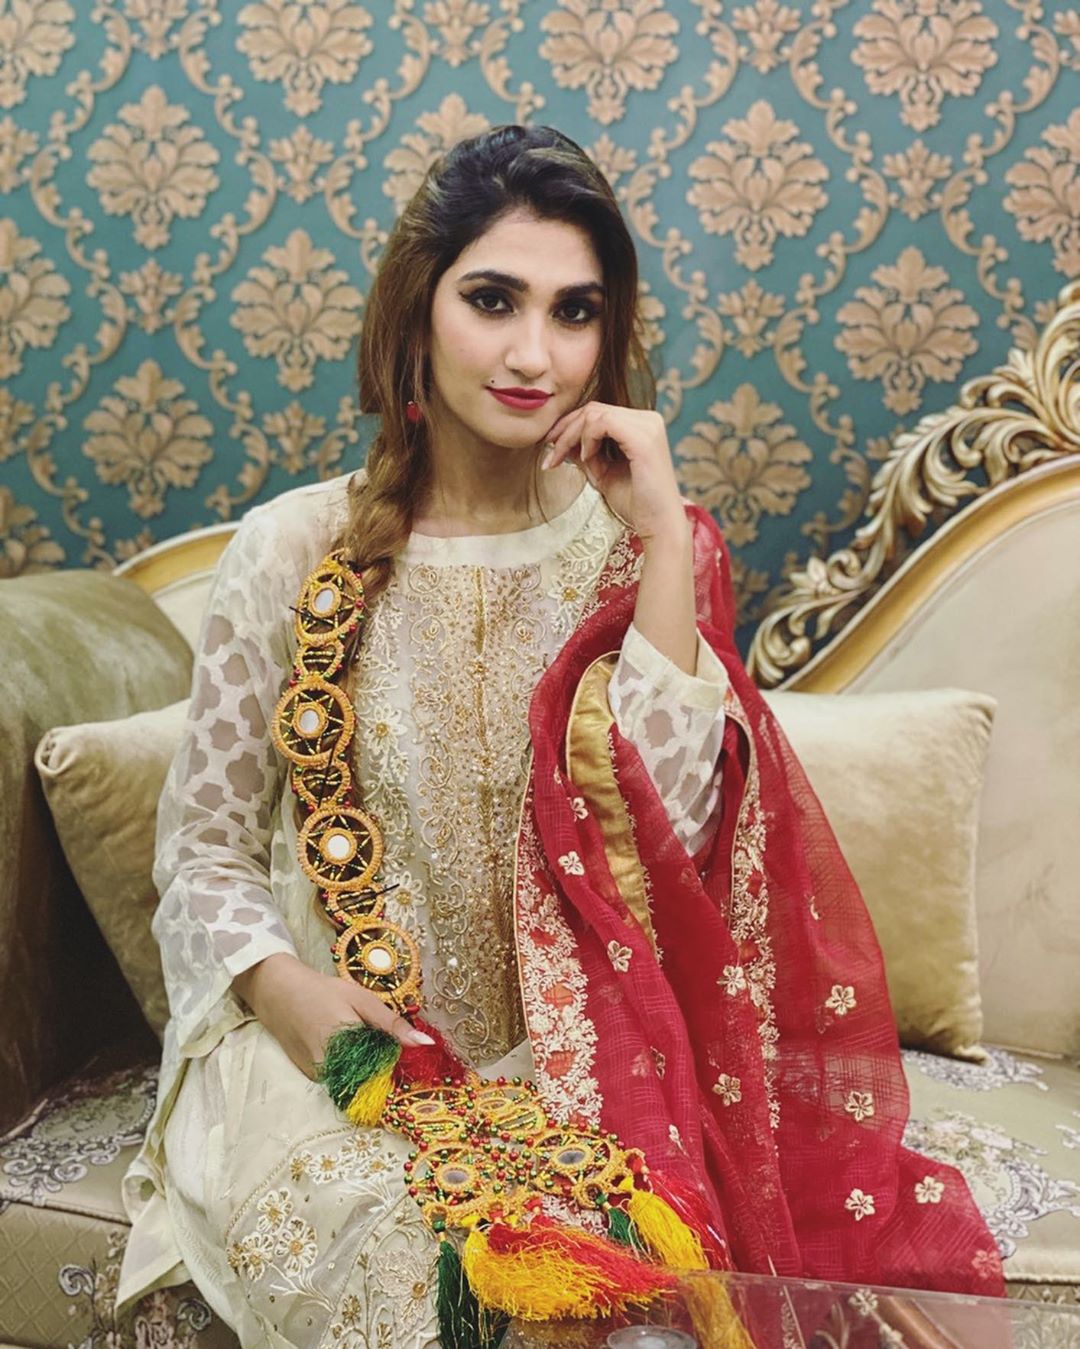 Cricketer Hassan Ali With his Wife Samyah - Latest Pictures